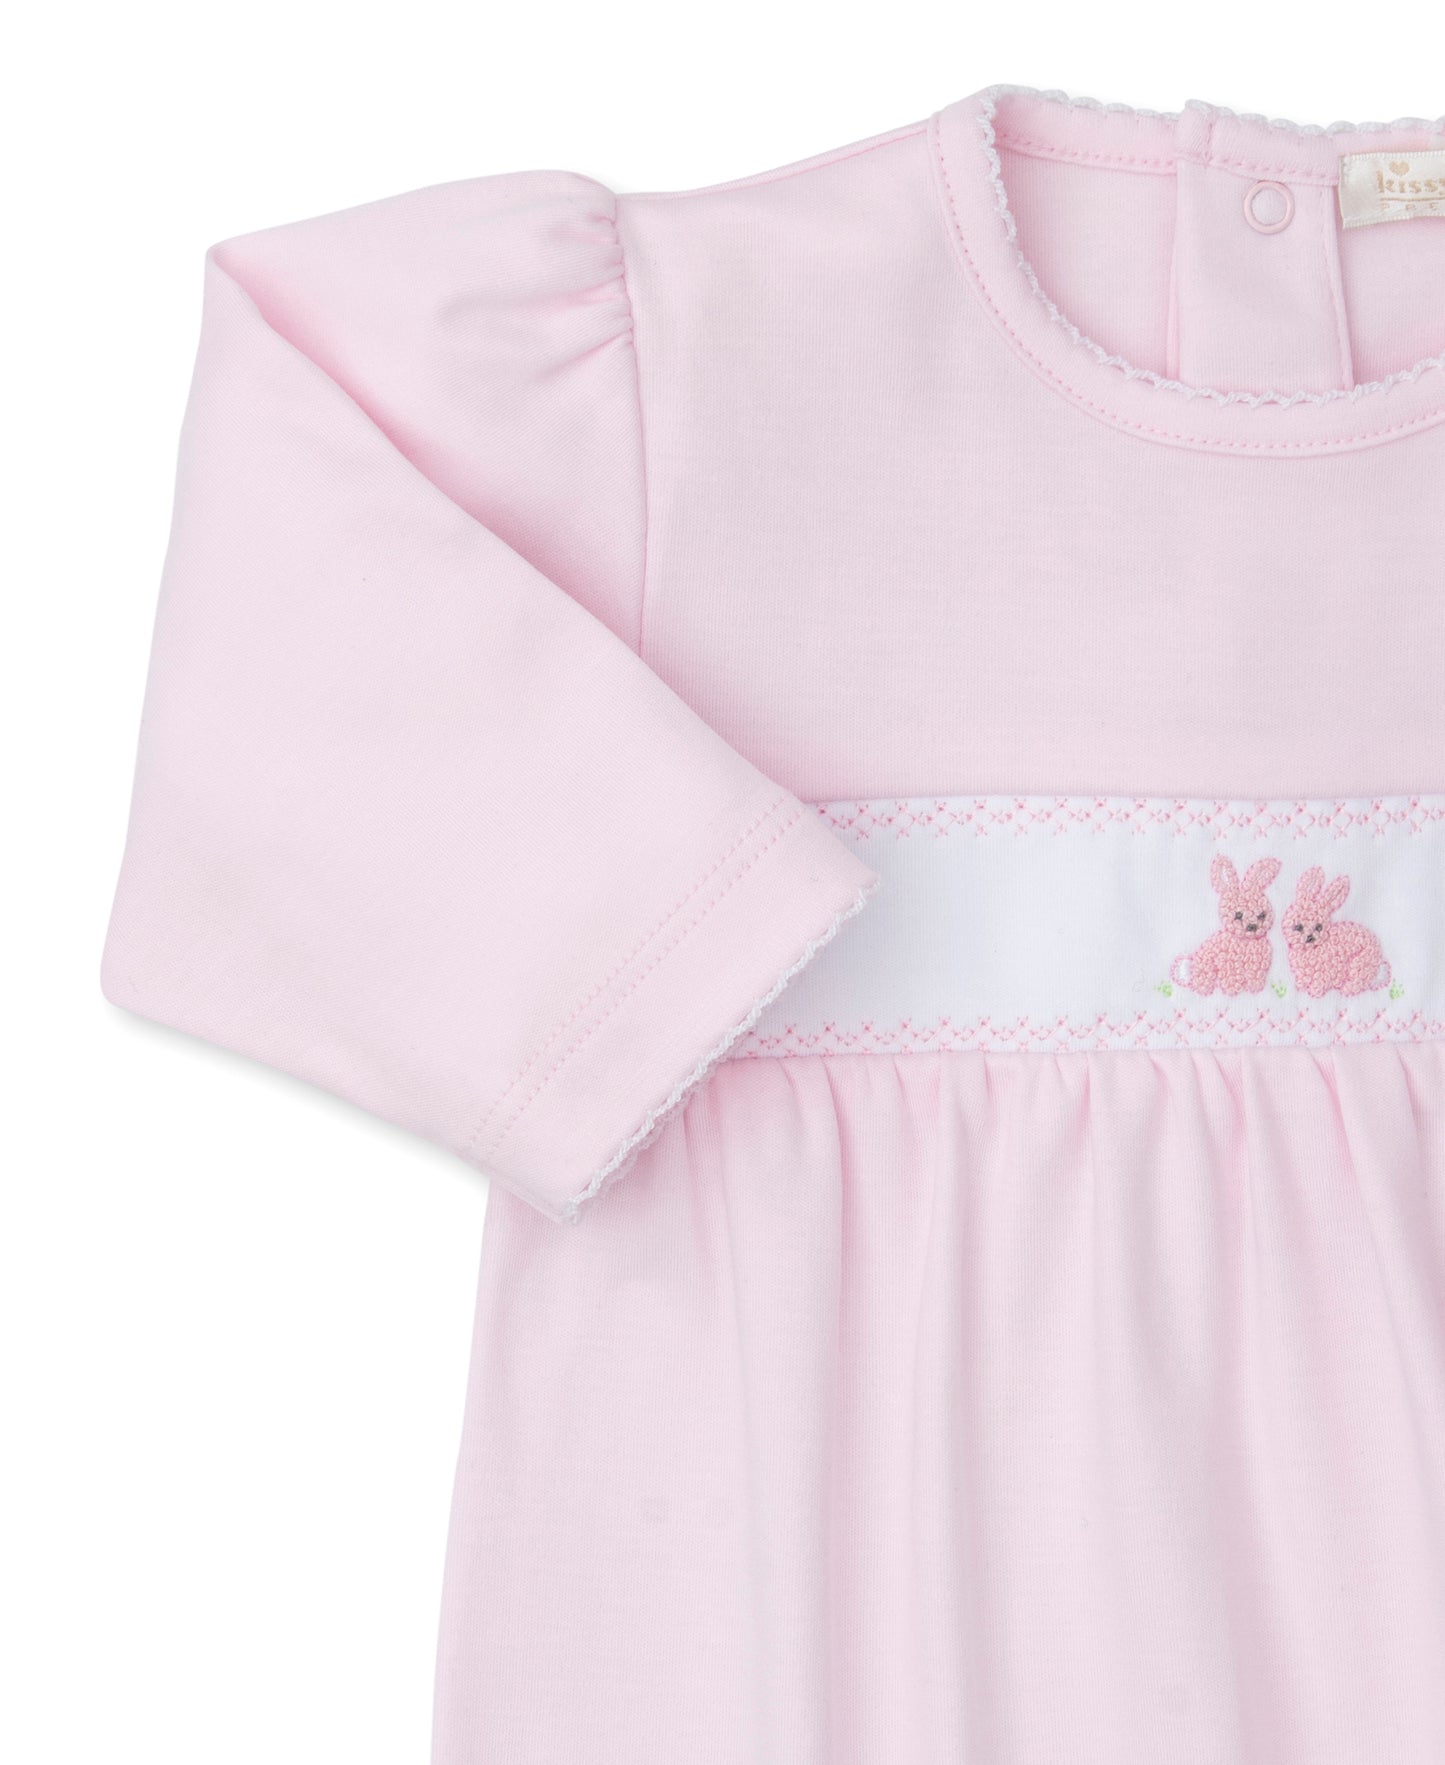 Premier Cottontail Hollows Pink Hand Emb Sack Gown